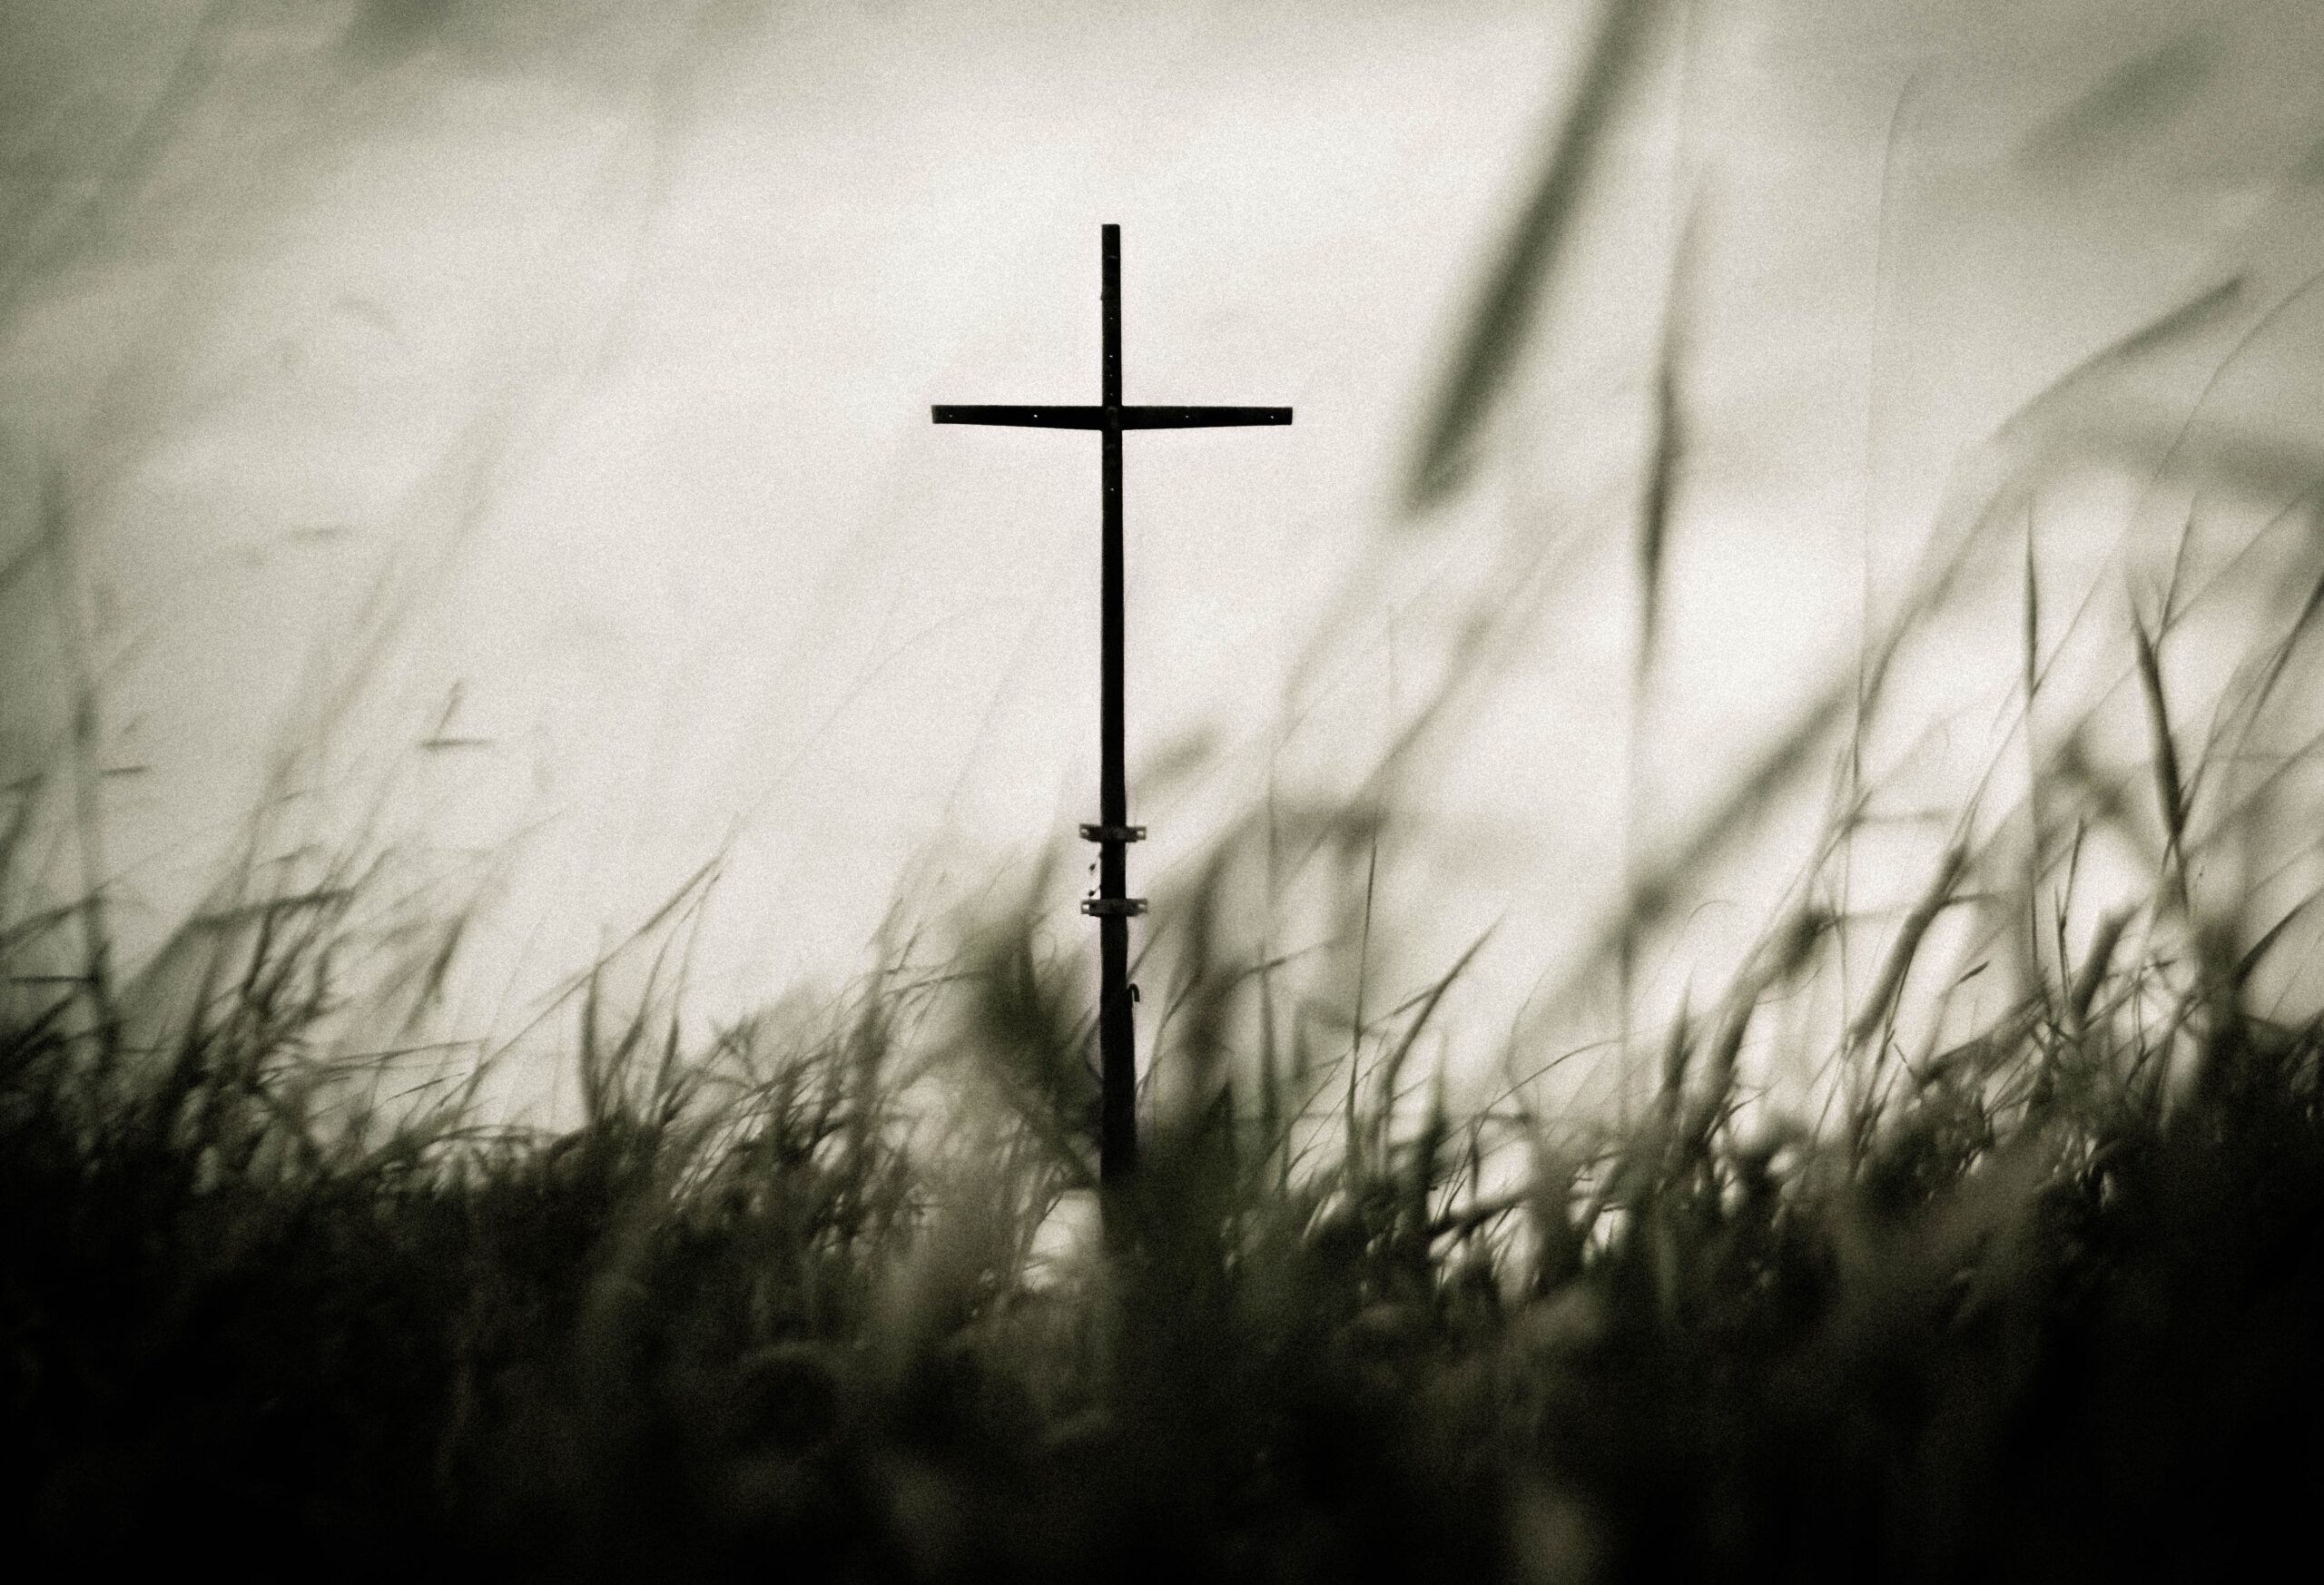 Cross in a field of tall grasses | xPhoto by Allef Vinicius on Unsplash